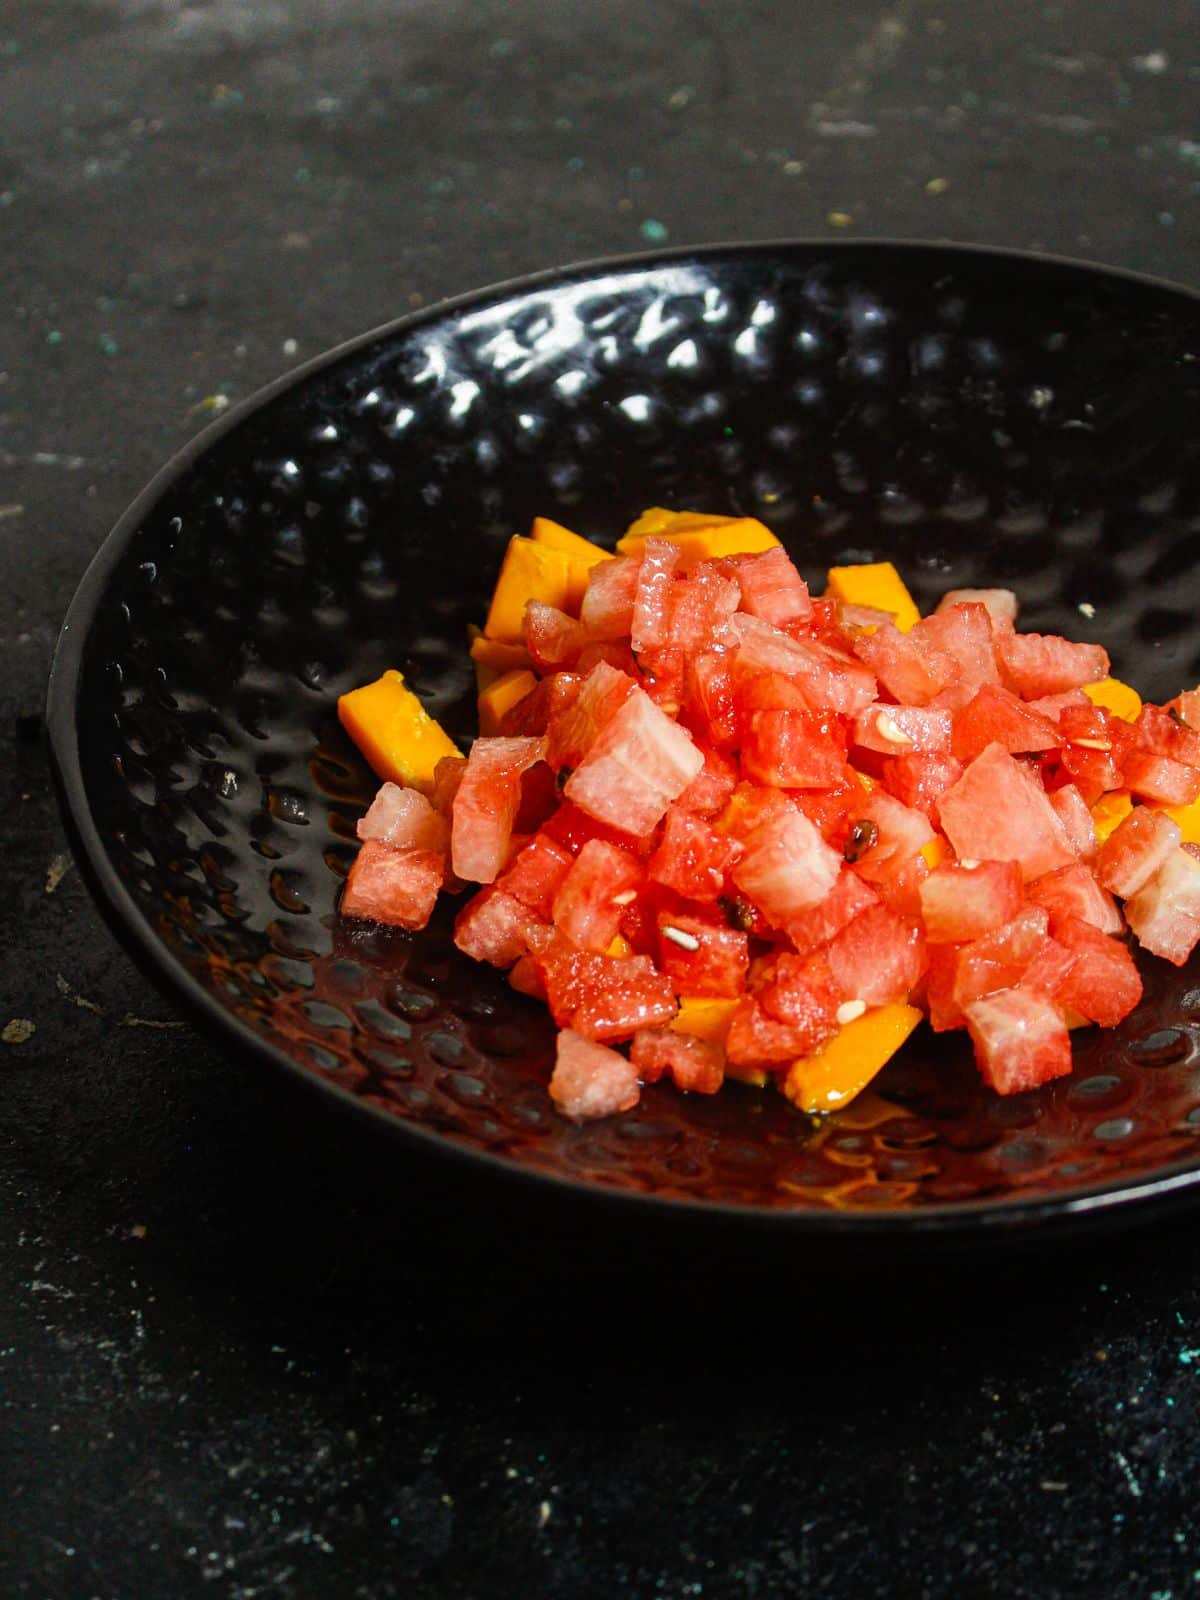 Add pieces of watermelon over the mango in a saucer